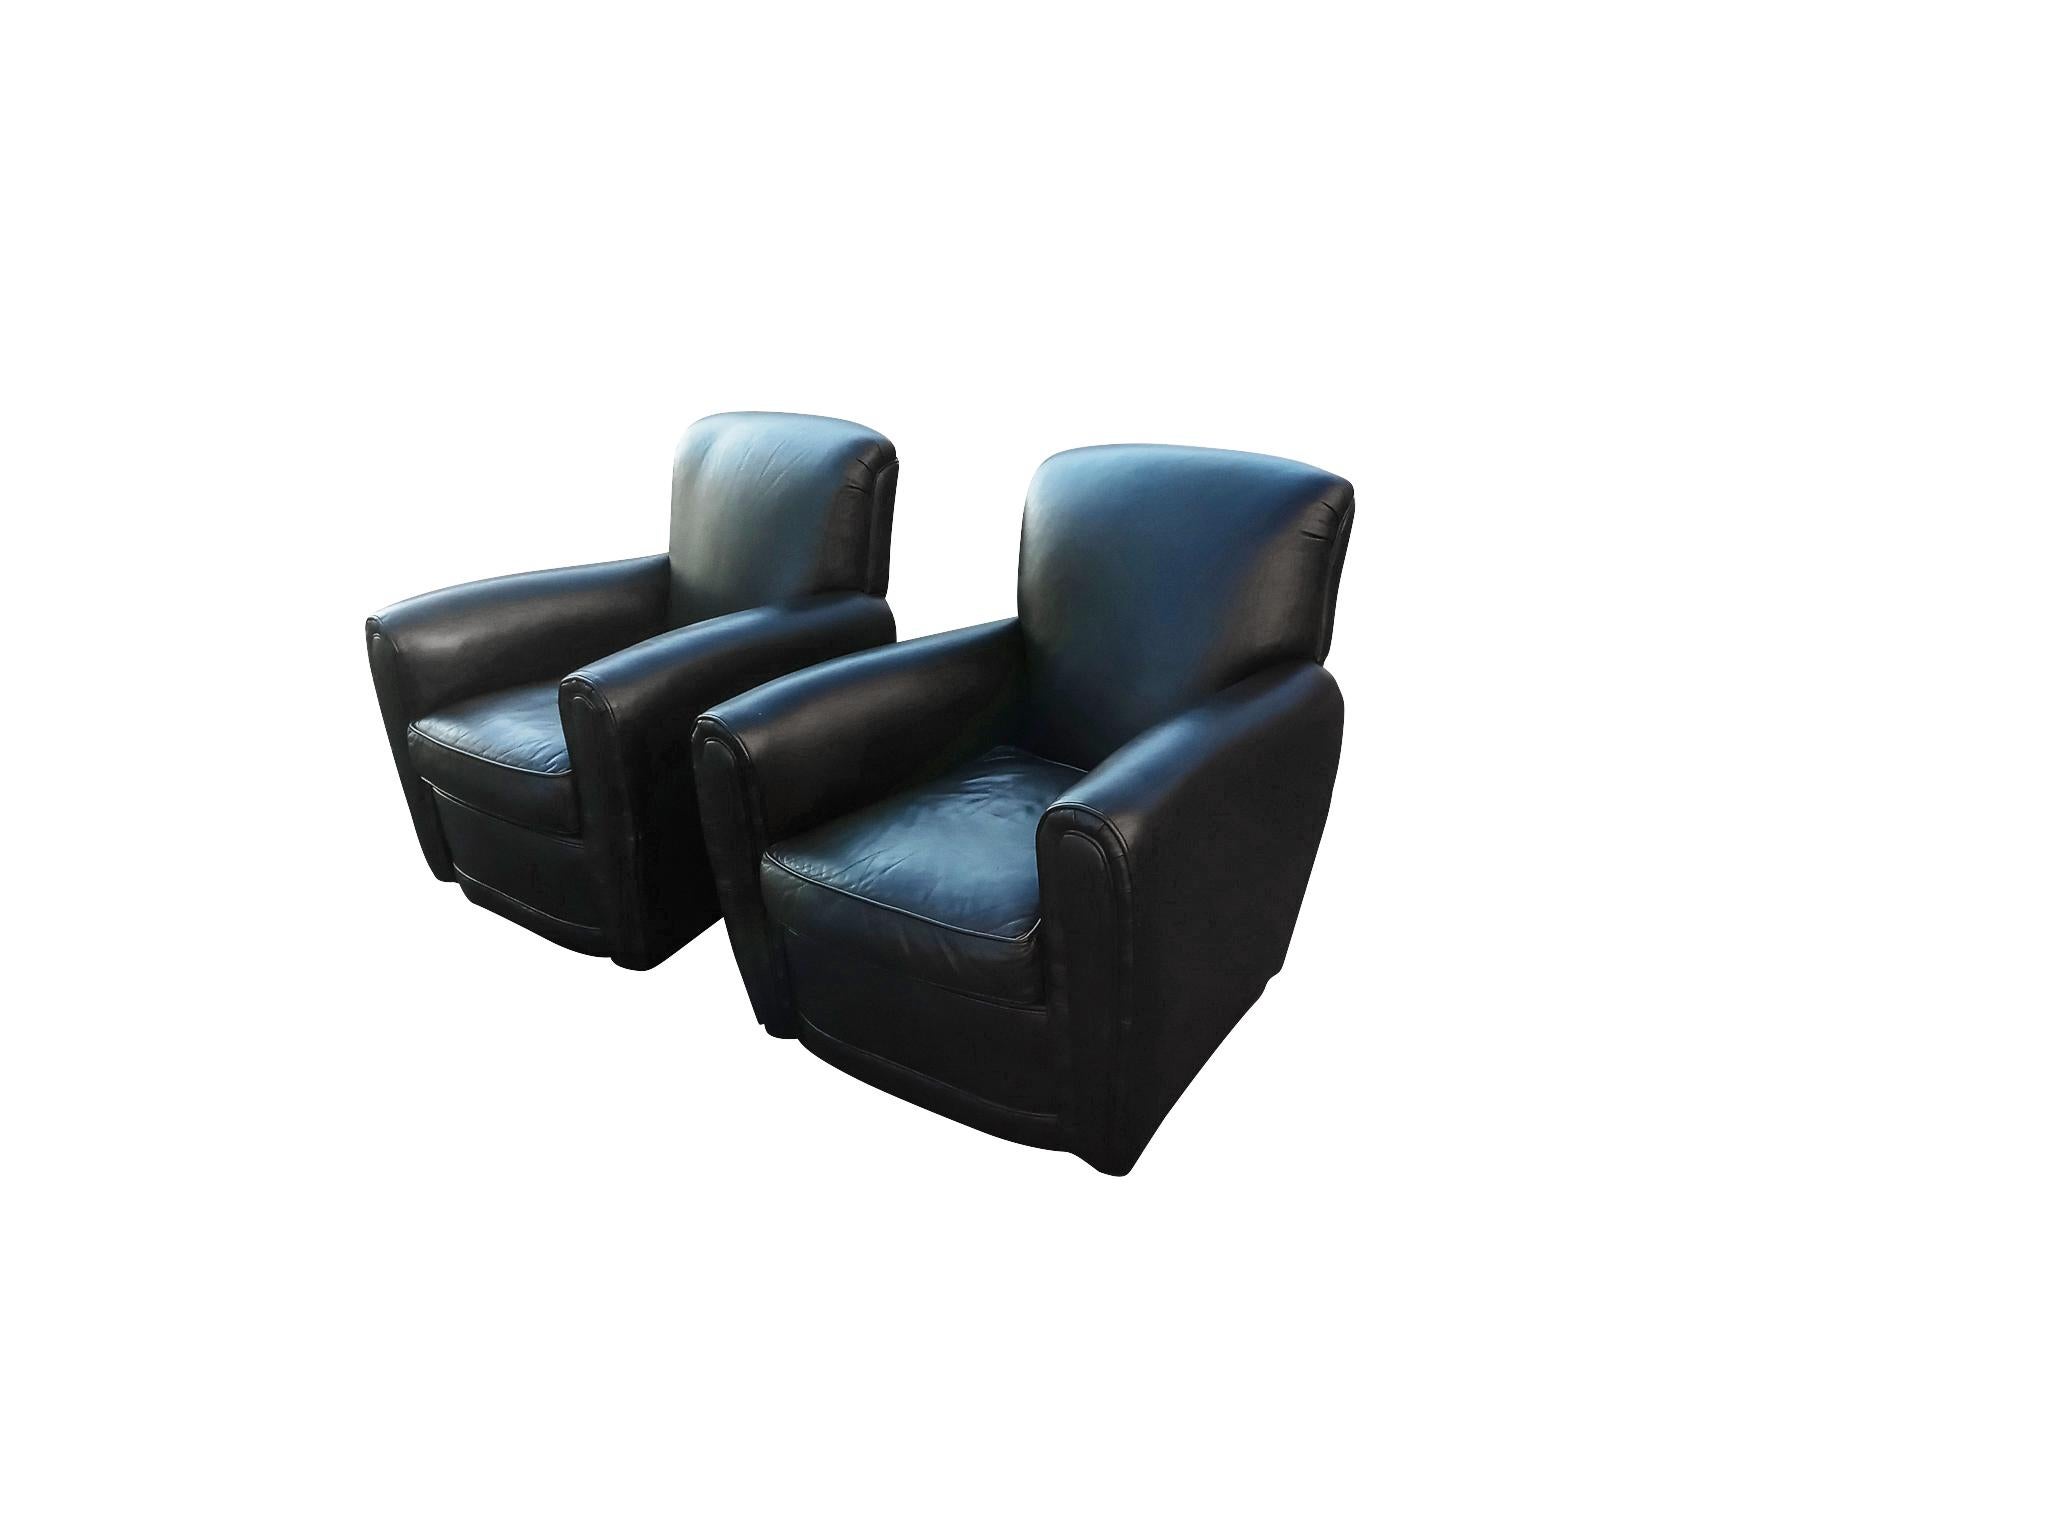 American Drexel Heritage Art Deco Inspired Pair of Black Leather Club or Lounge Chairs For Sale